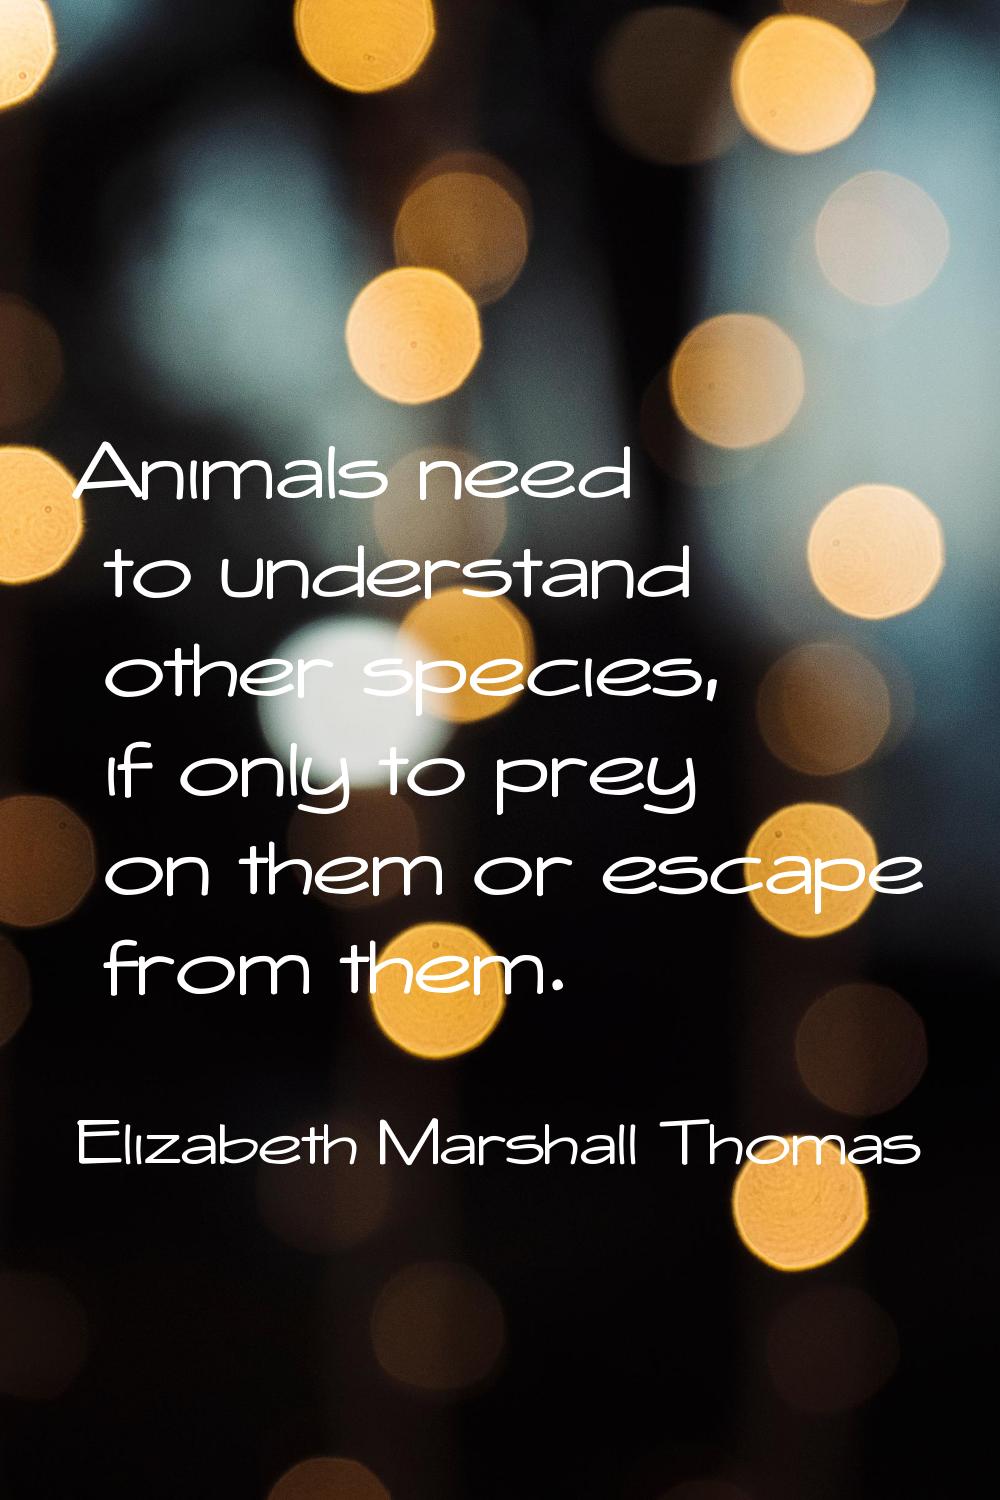 Animals need to understand other species, if only to prey on them or escape from them.